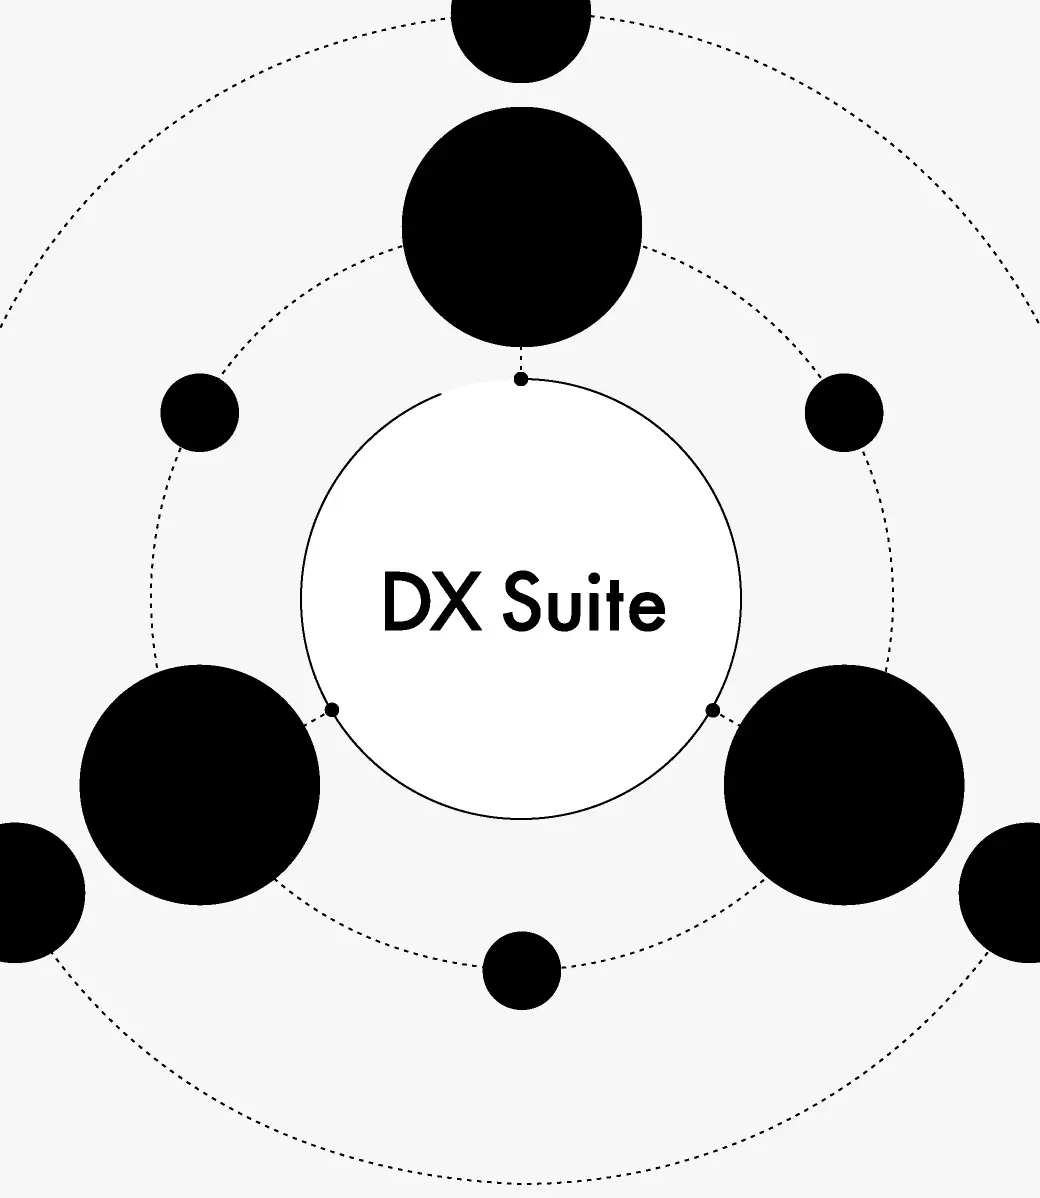 Connecting data, Advancing DX.